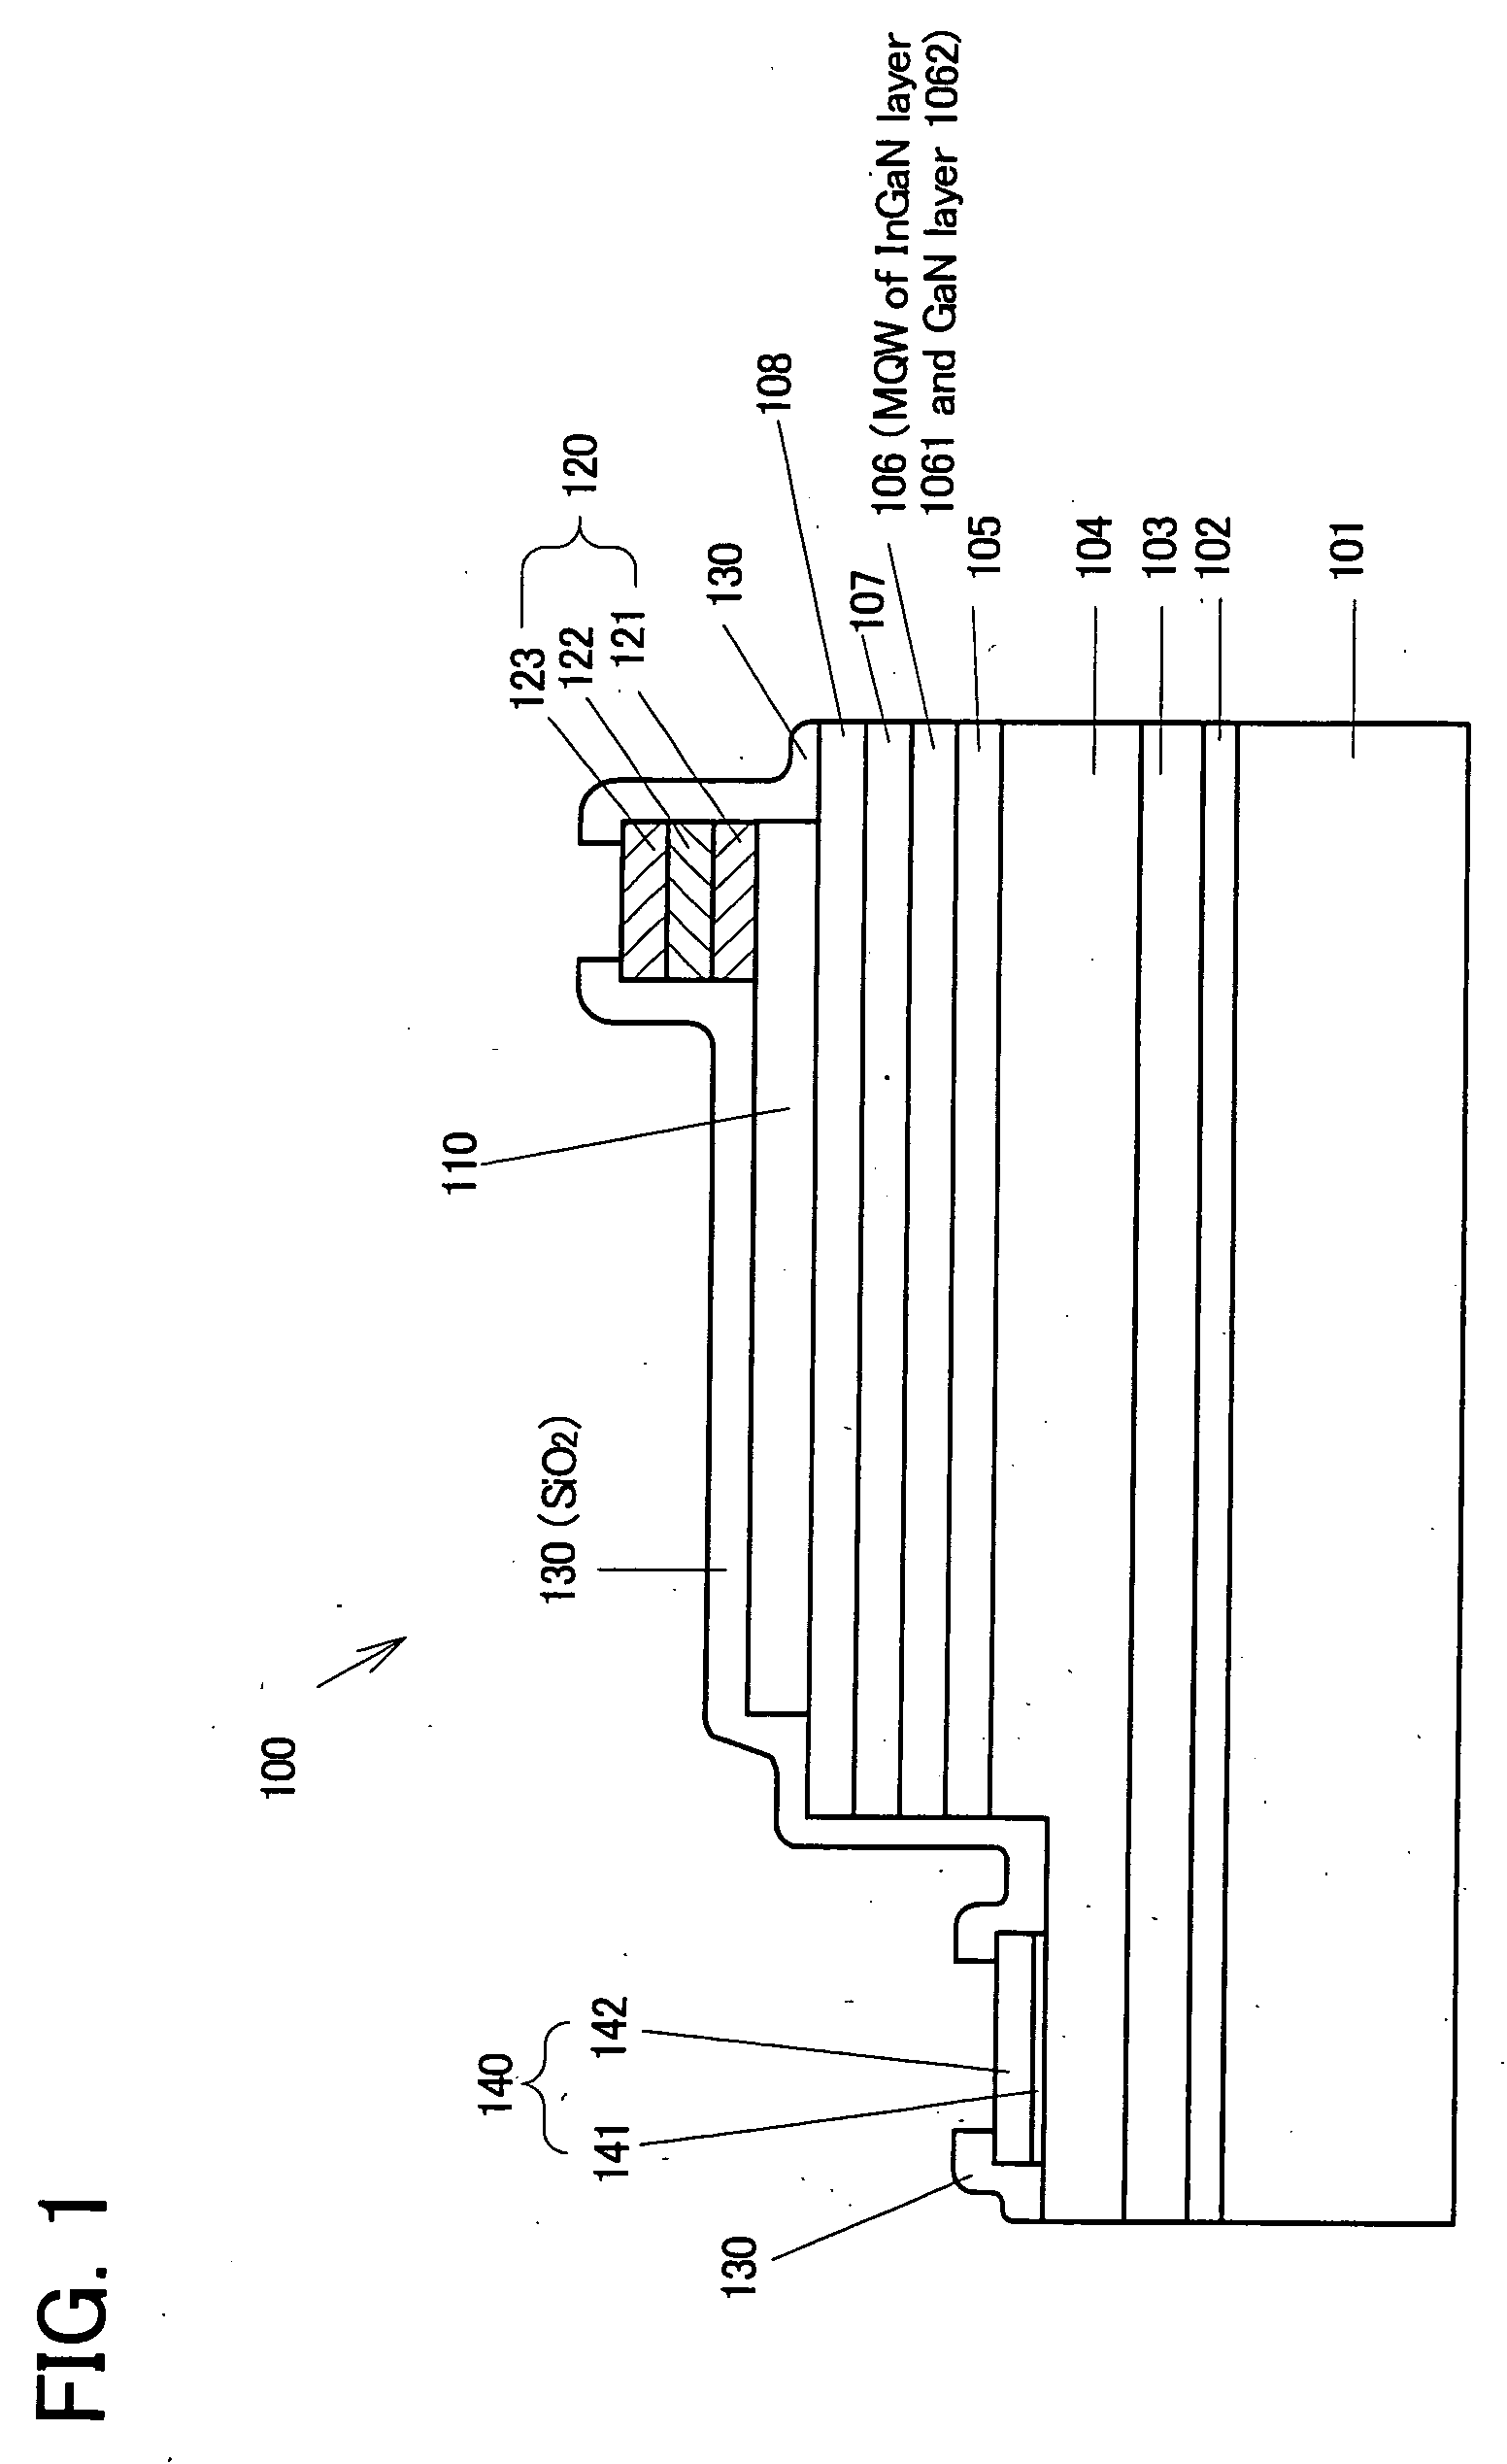 Method for forming an electrode